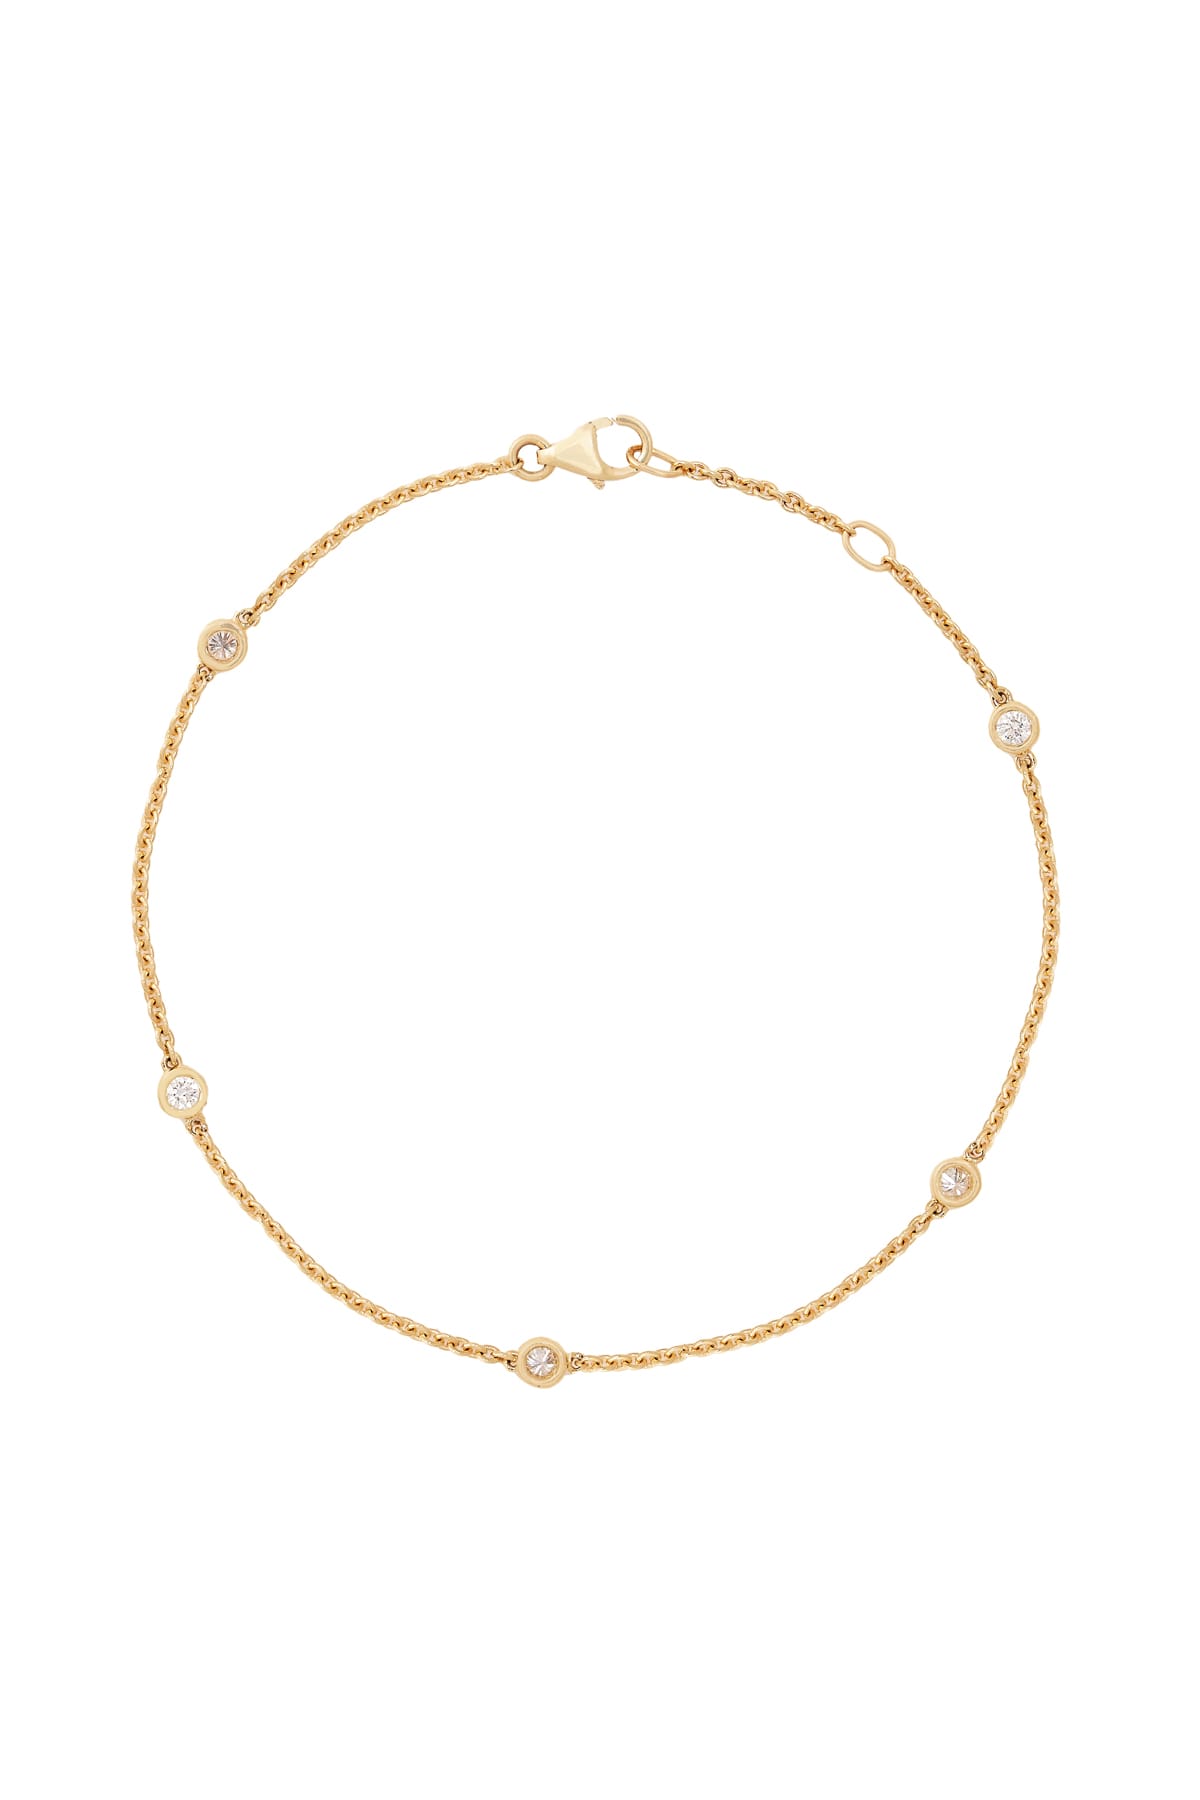 18ct yellow gold fine cable link bracelet with 5 x bezel set round brilliant cut diamonds from LeGassick.